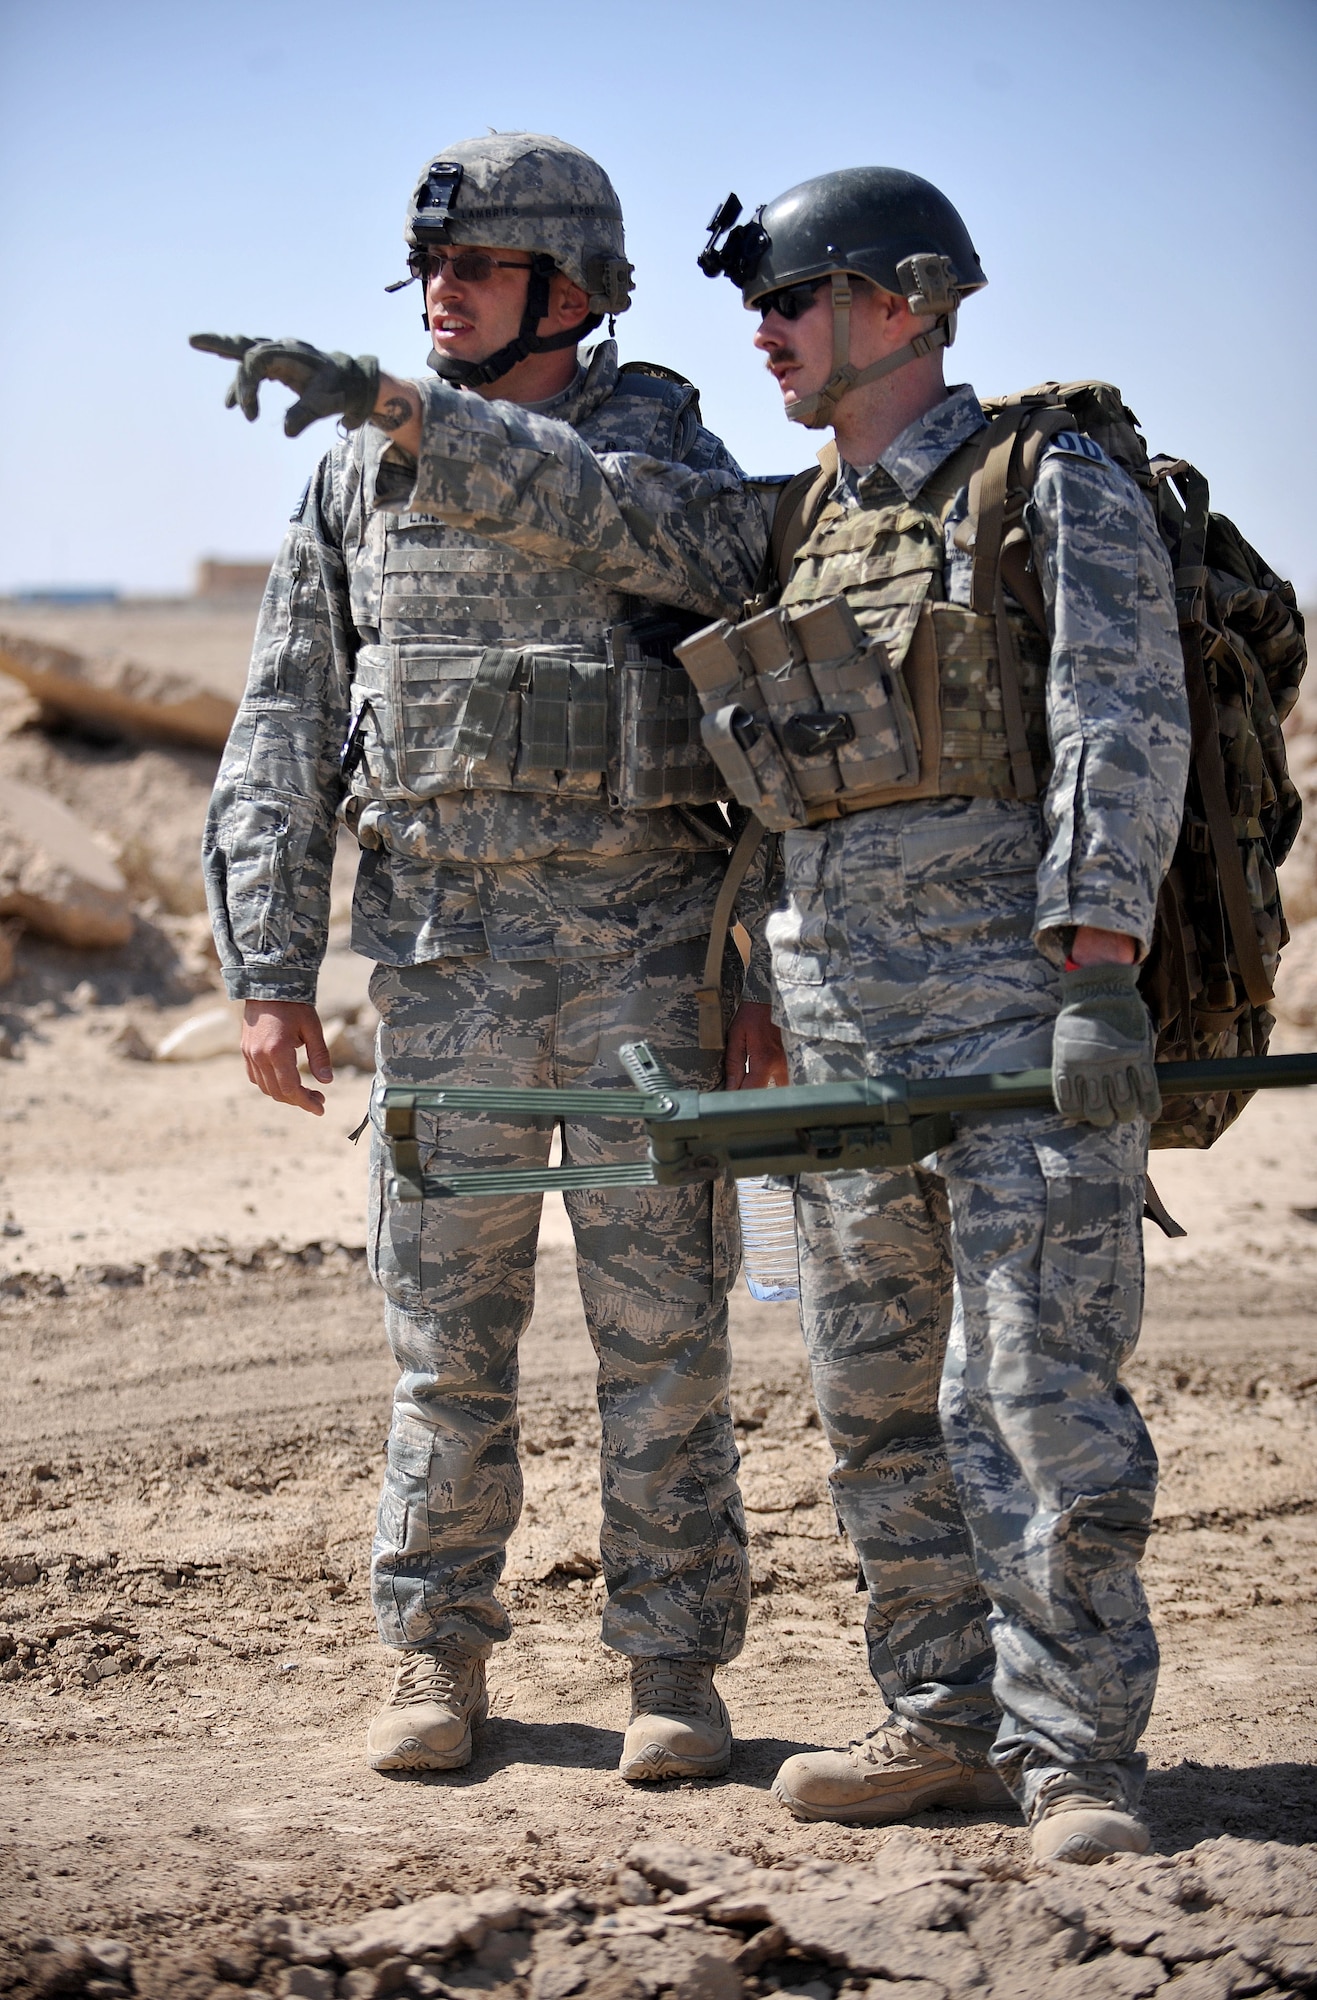 Staff Sgt. Glenn Henthorn, 407th Expeditionary Operations Support Squadron explosive ordnance disposal team chief, points in the distance to show an EOD team member a mock improvised explosive device during a training exercise March 3, 2010, at Ali Air Base, Iraq. (U.S. Air Force photo by Senior Airman Andrew Lee/Released)